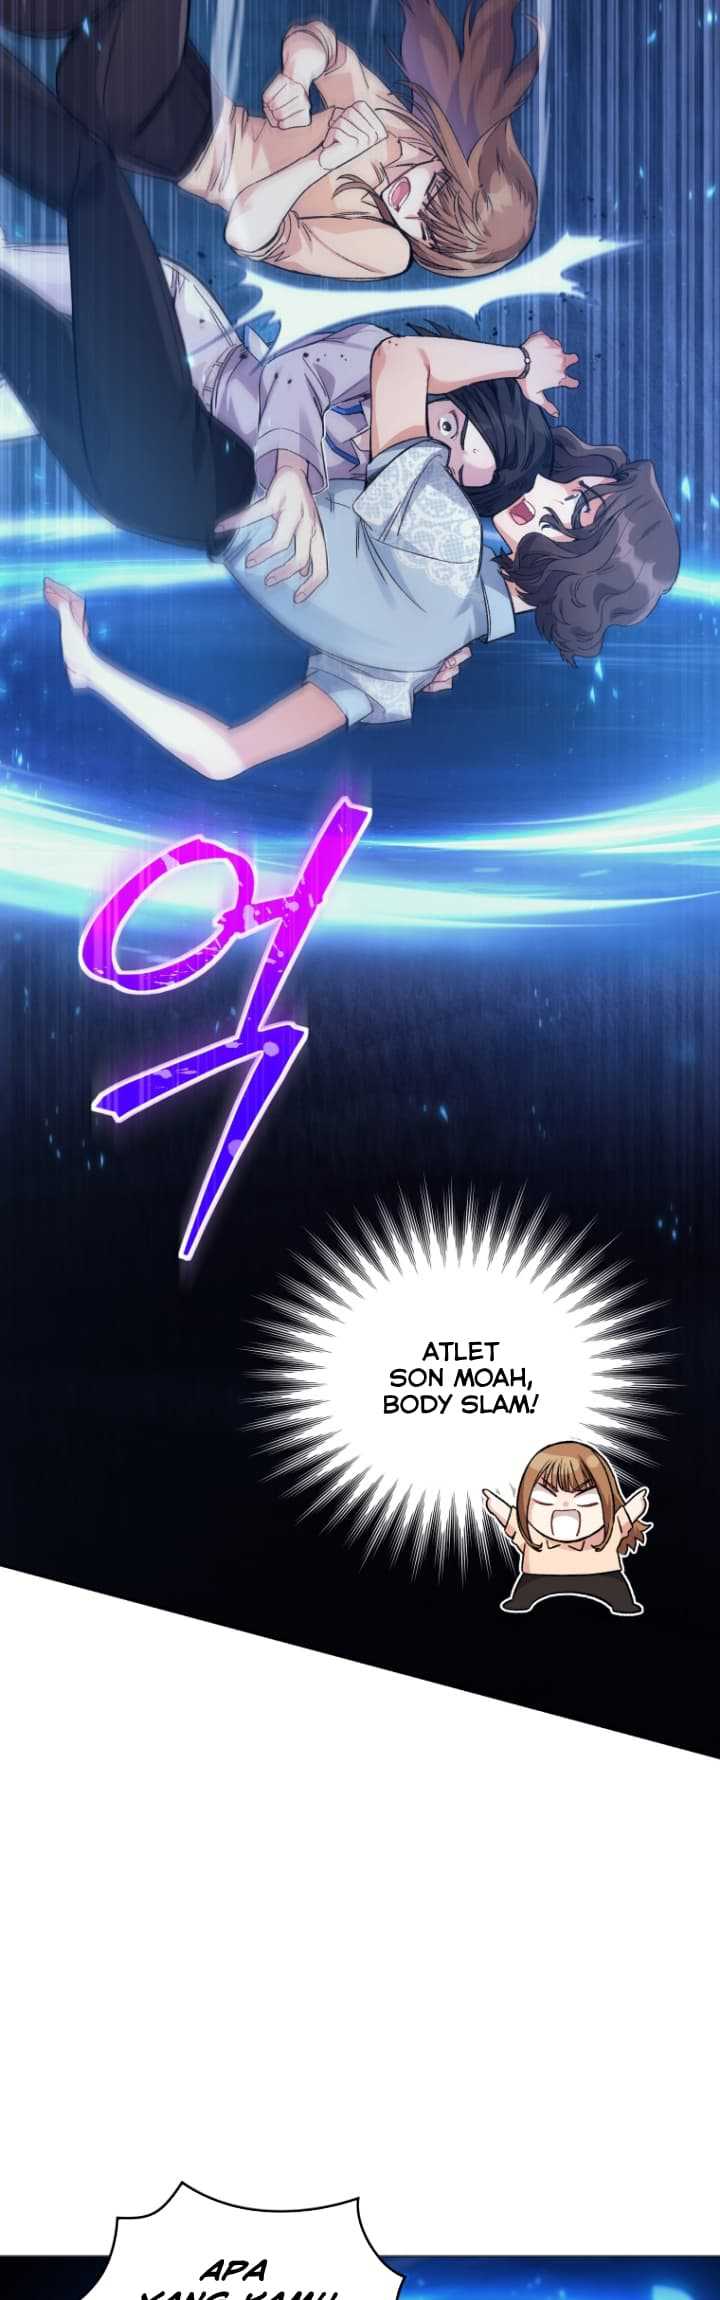 I Stole the Number One Ranker’s Soul Chapter 07